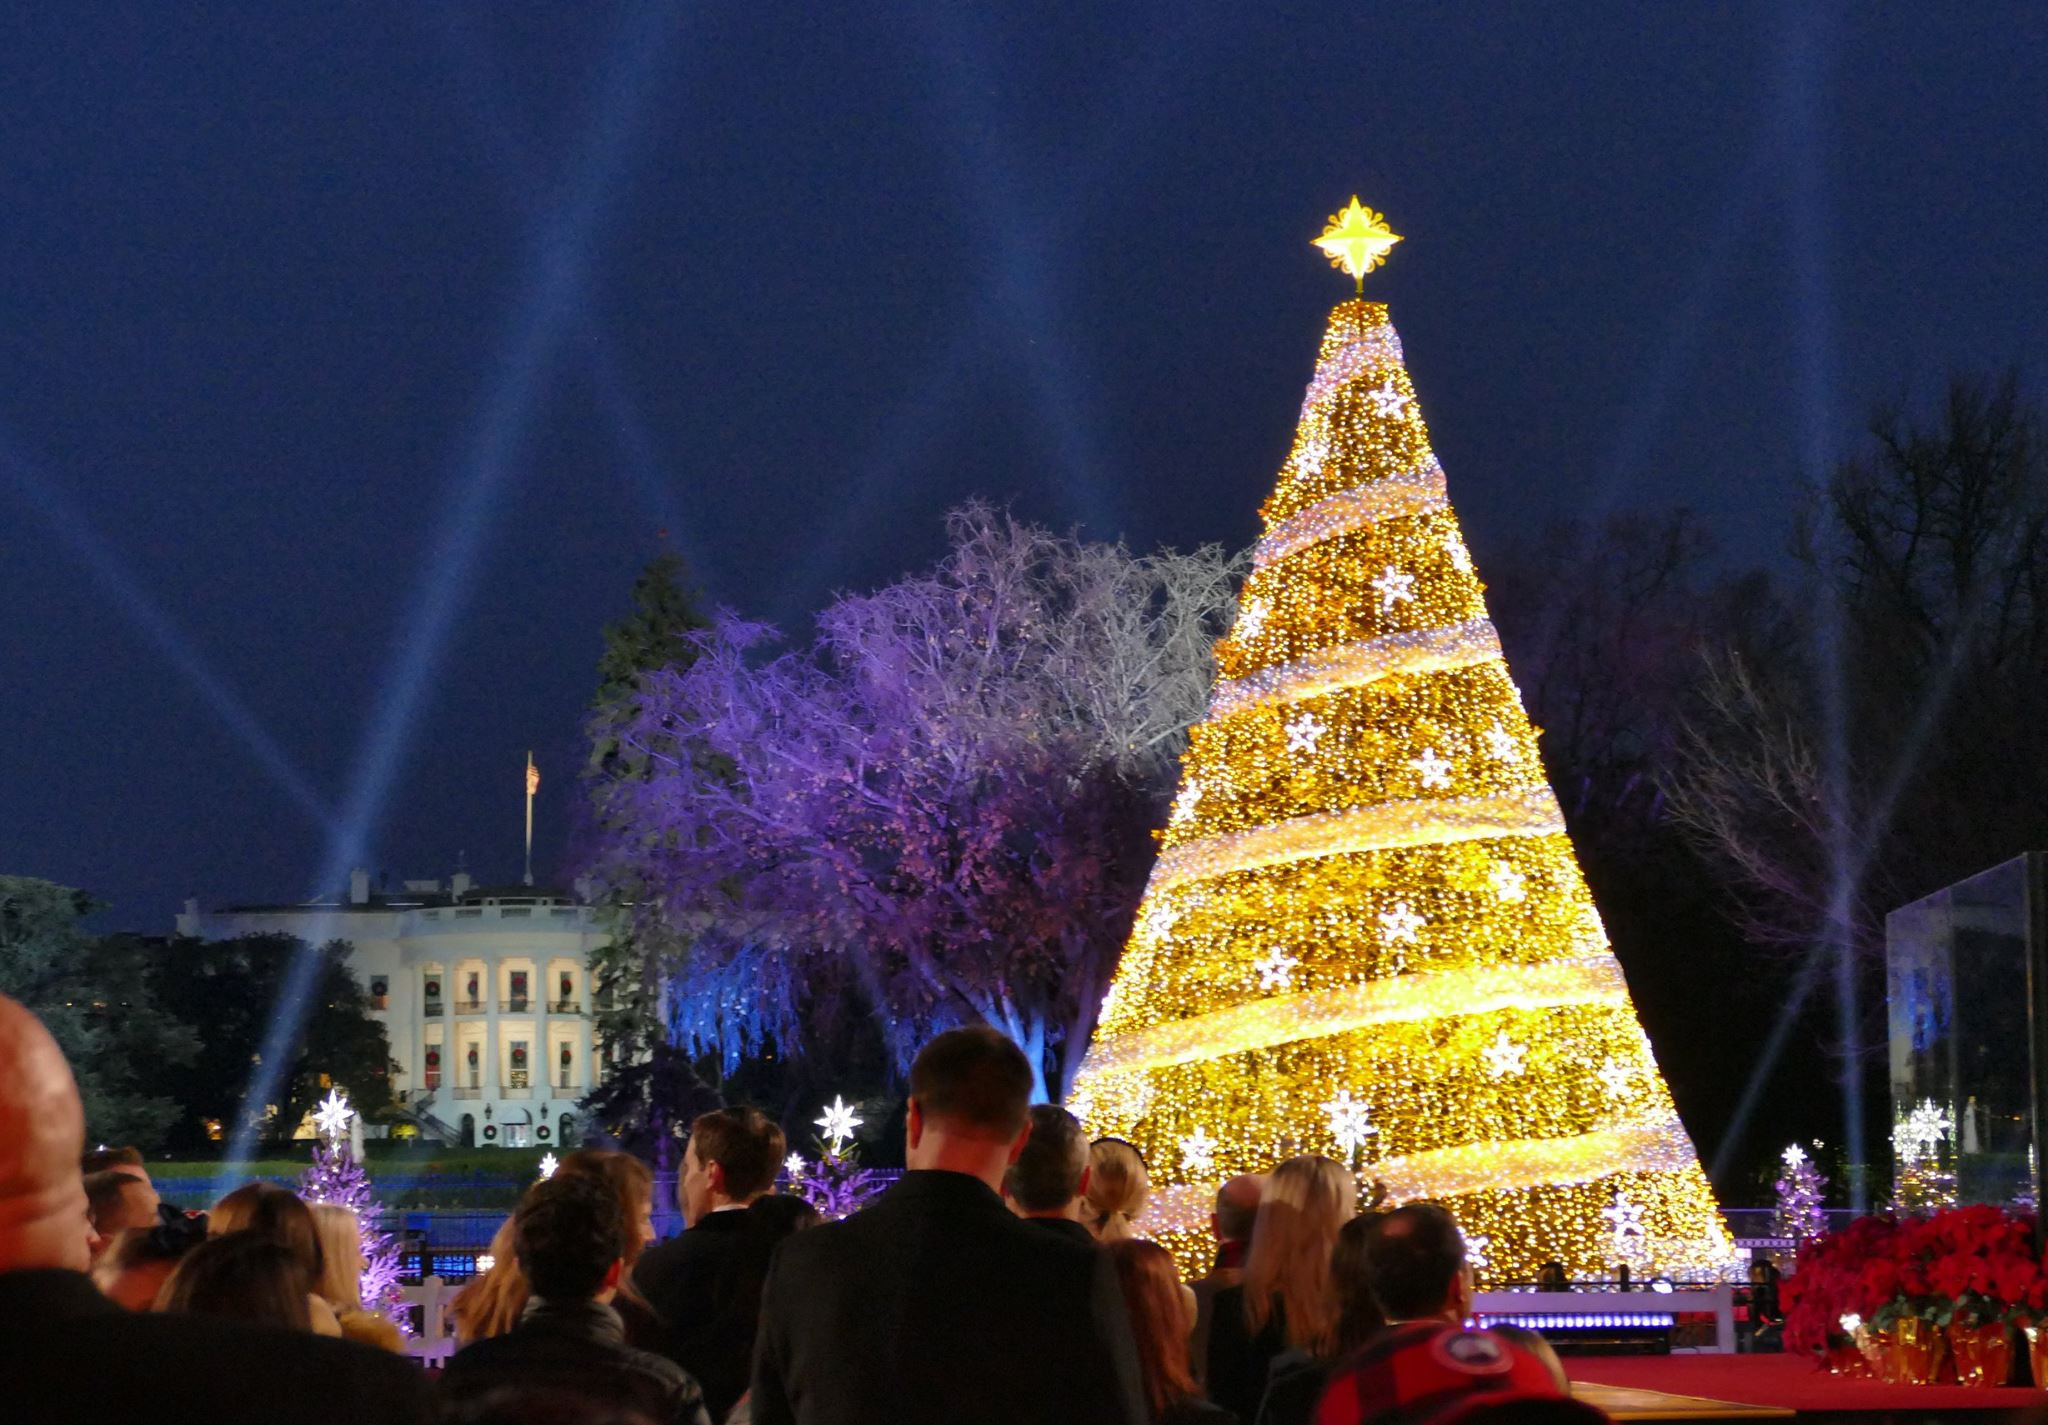 Whitehouse Christmas Tree Lighting 2019
 Trump Gives Federal Employees Christmas Eve f Pay